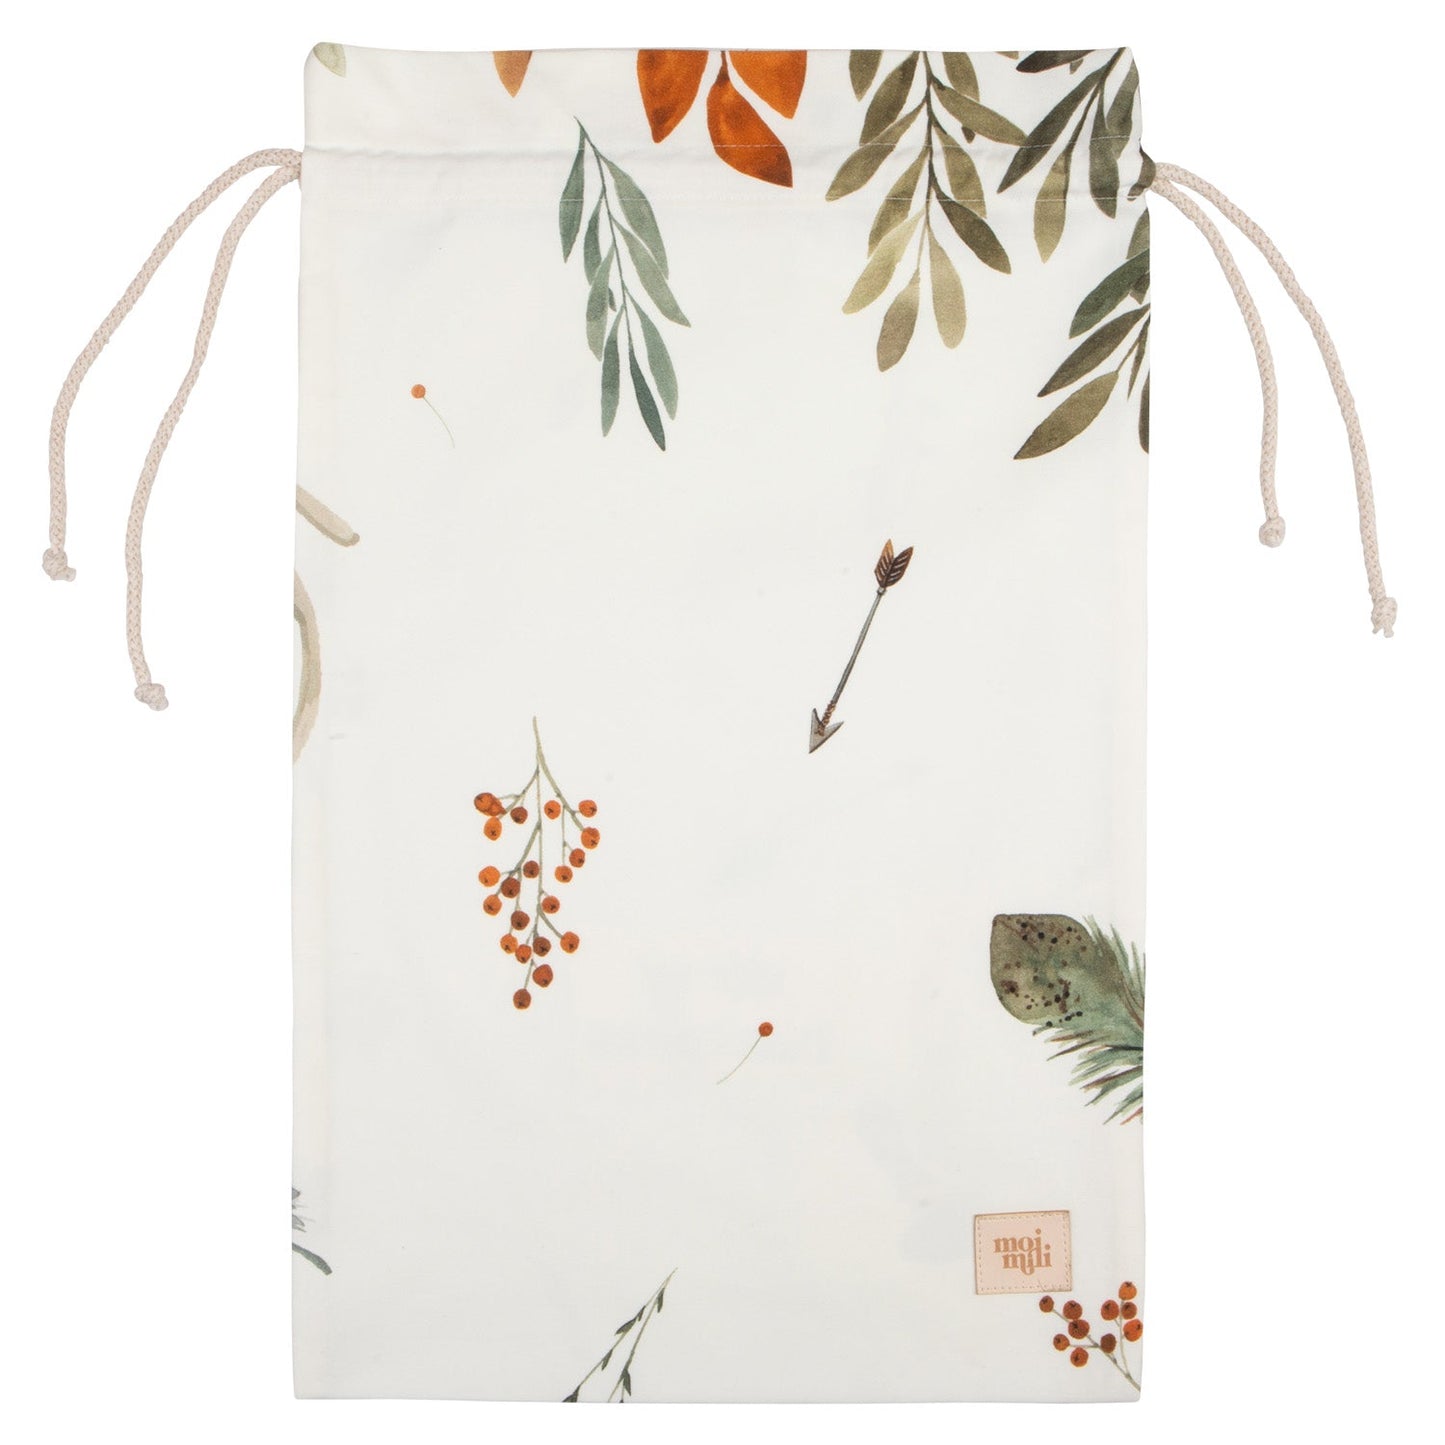 Travel Bags "Forest Friends" (Set of 2)